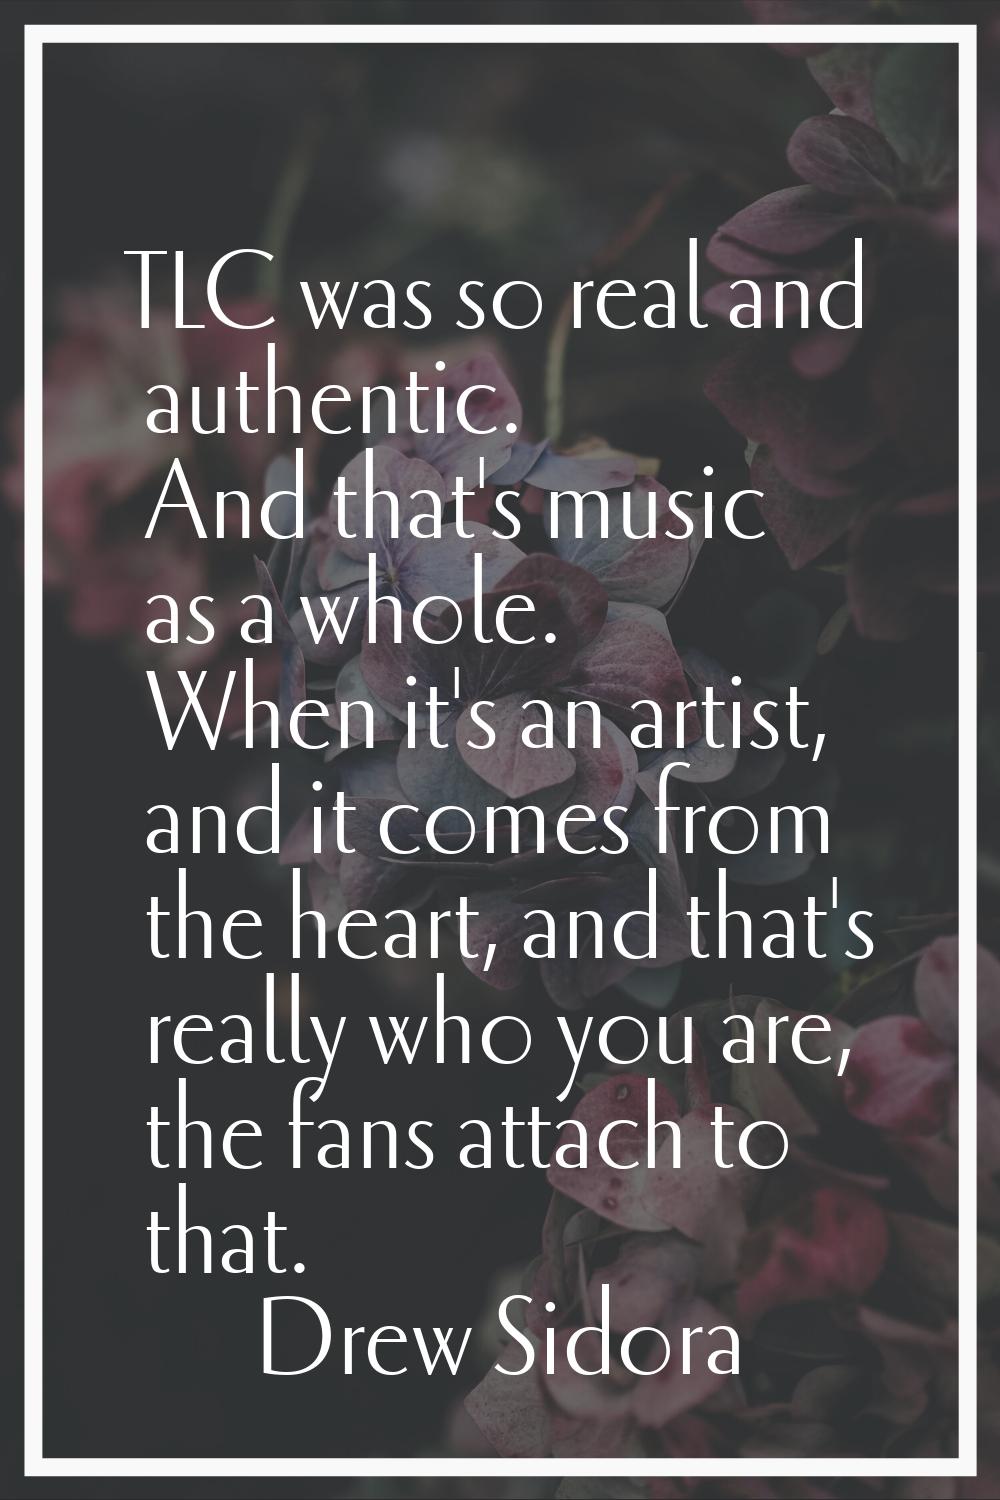 TLC was so real and authentic. And that's music as a whole. When it's an artist, and it comes from 